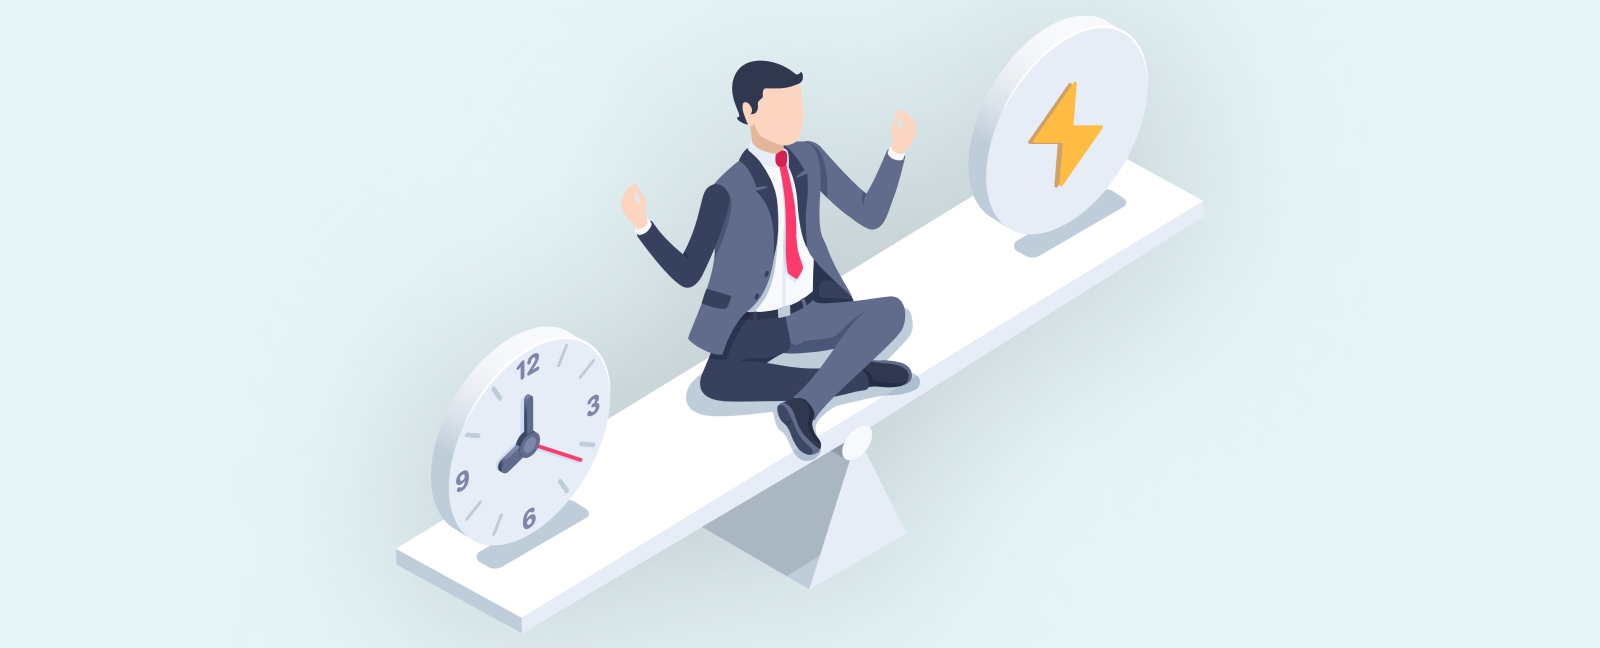 Energy Management or Time Management? The Million Dollar Question